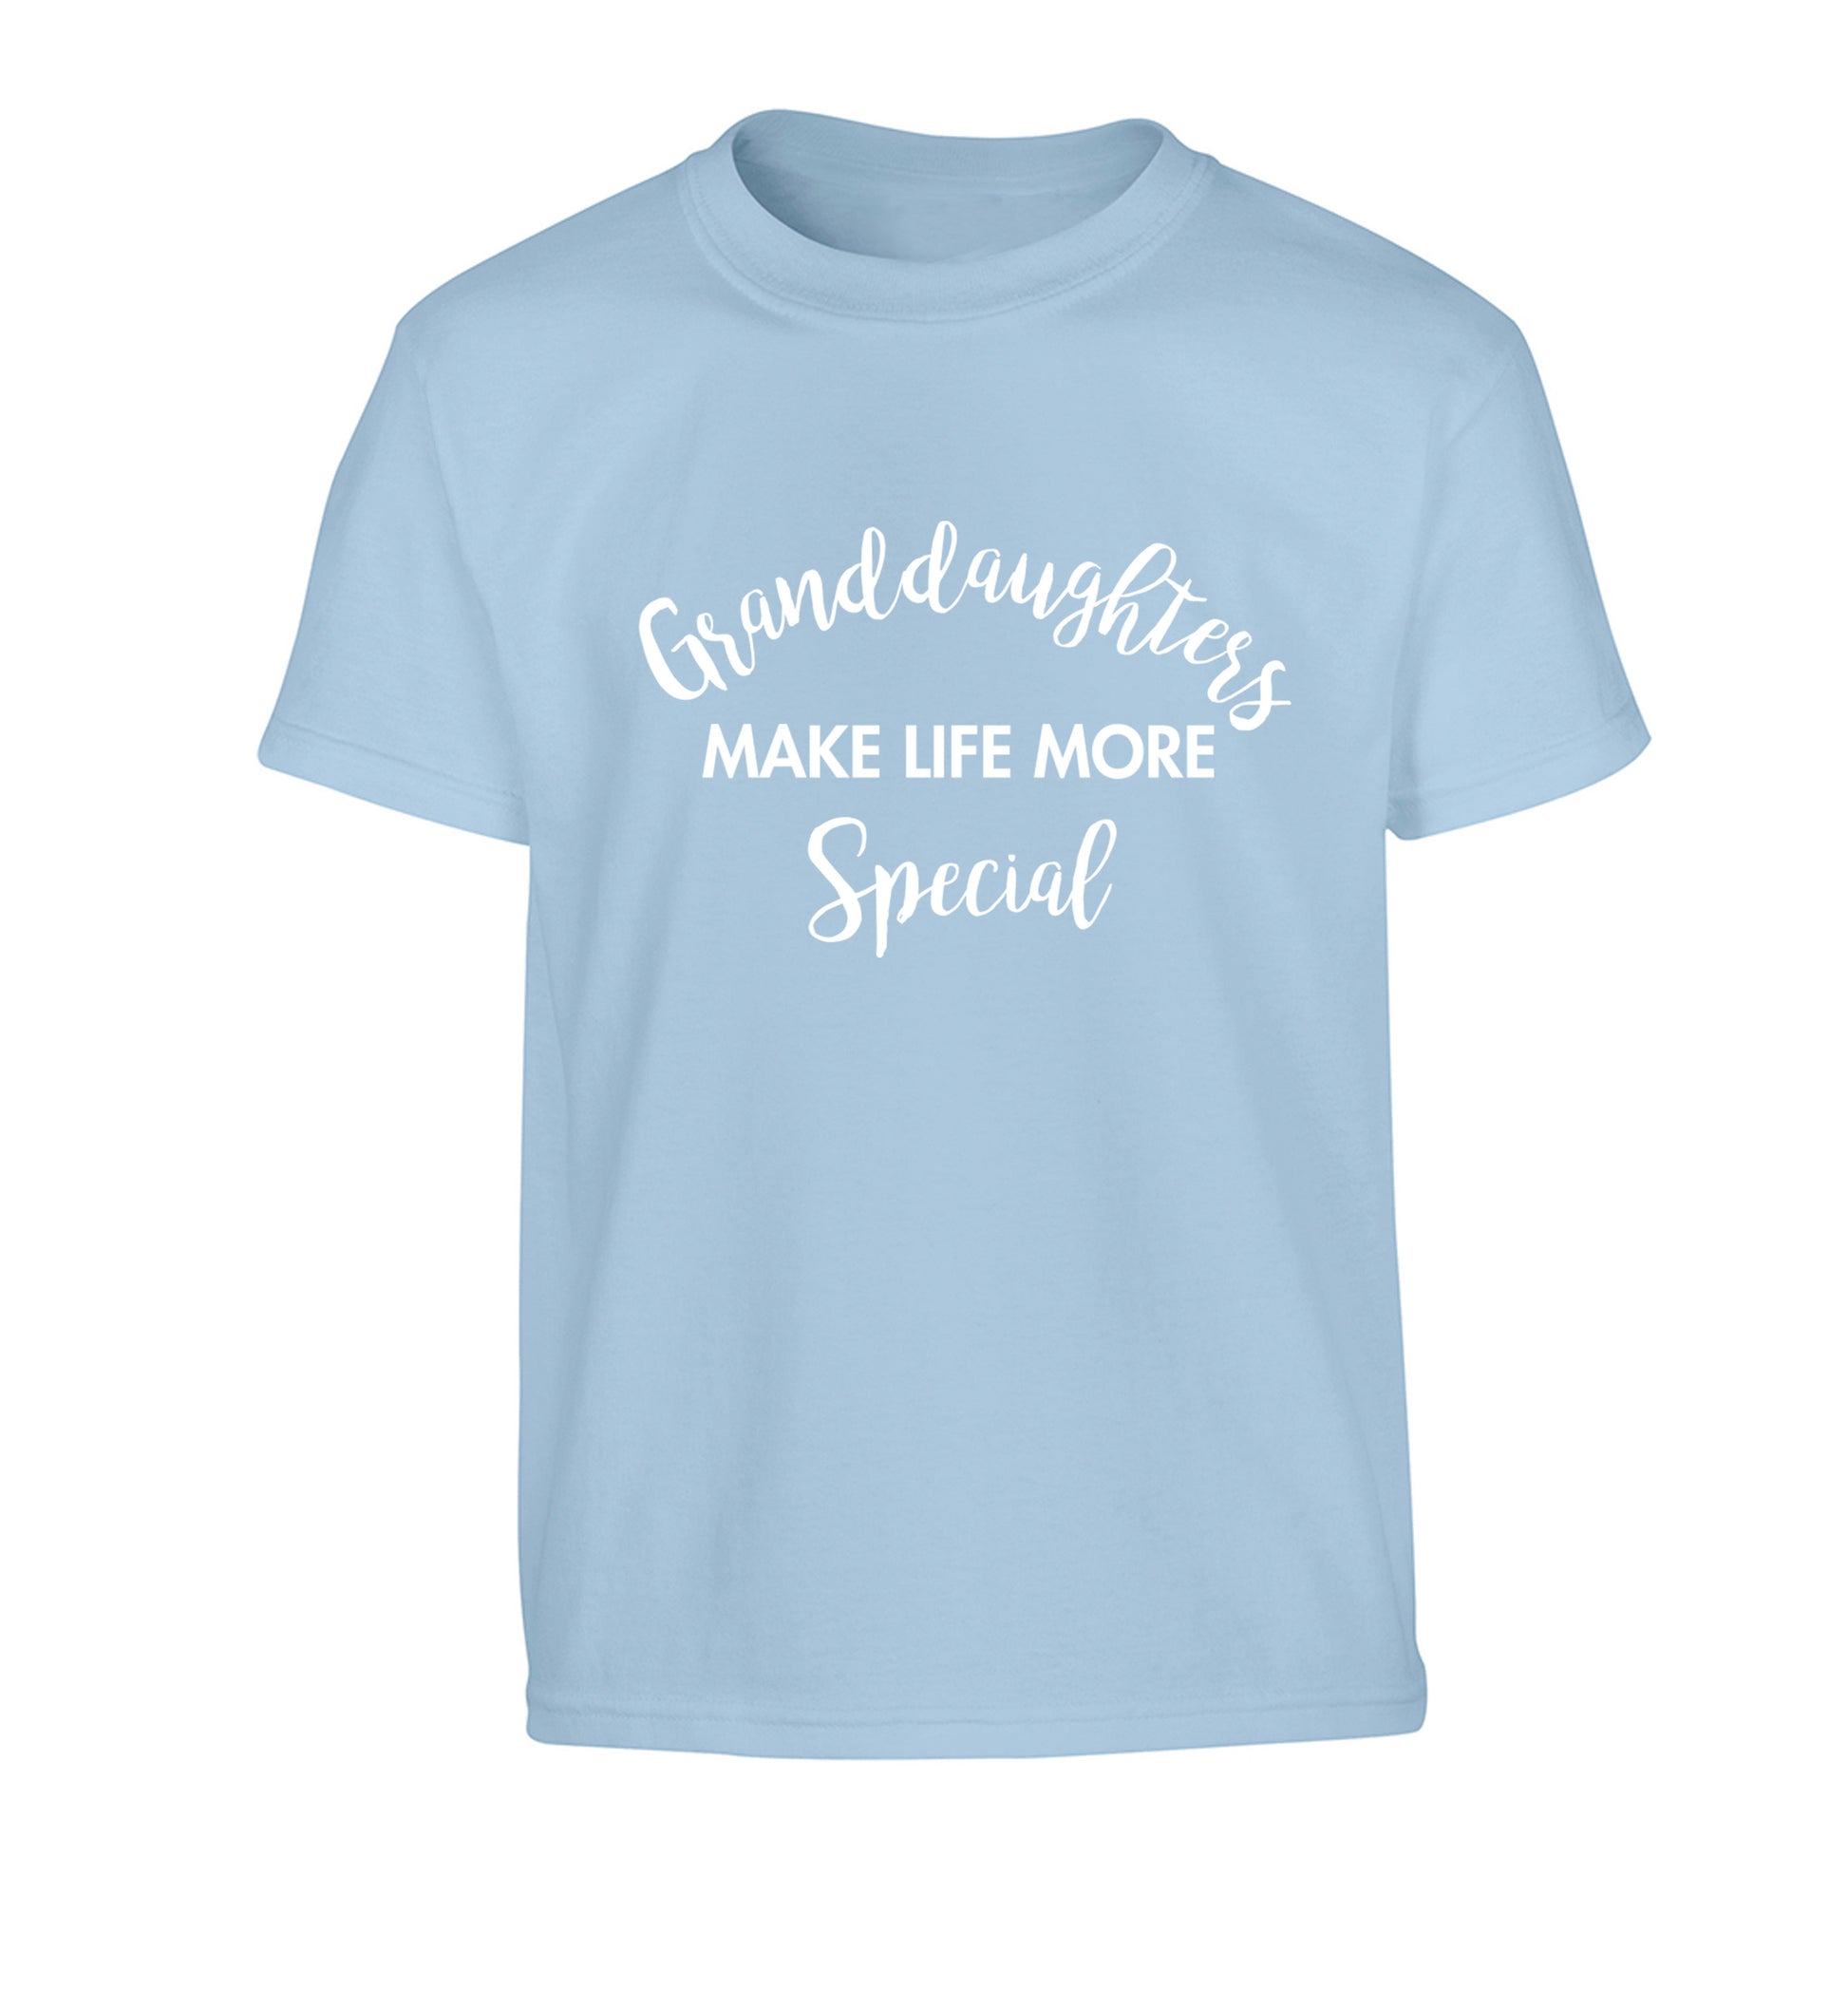 Granddaughters make life more special Children's light blue Tshirt 12-14 Years